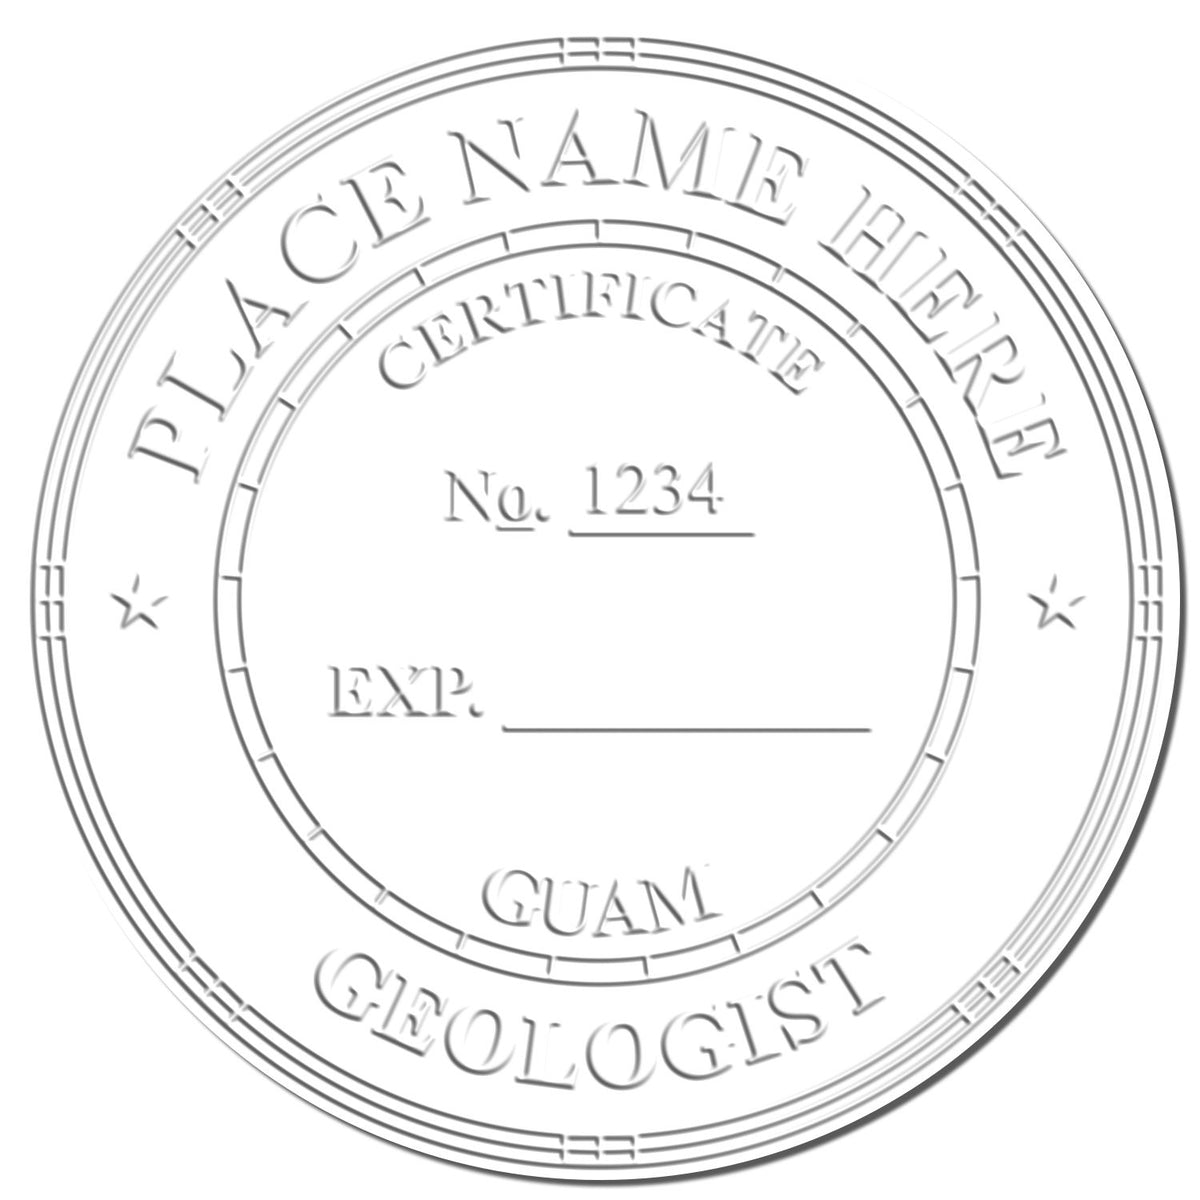 This paper is stamped with a sample imprint of the Handheld Guam Professional Geologist Embosser, signifying its quality and reliability.